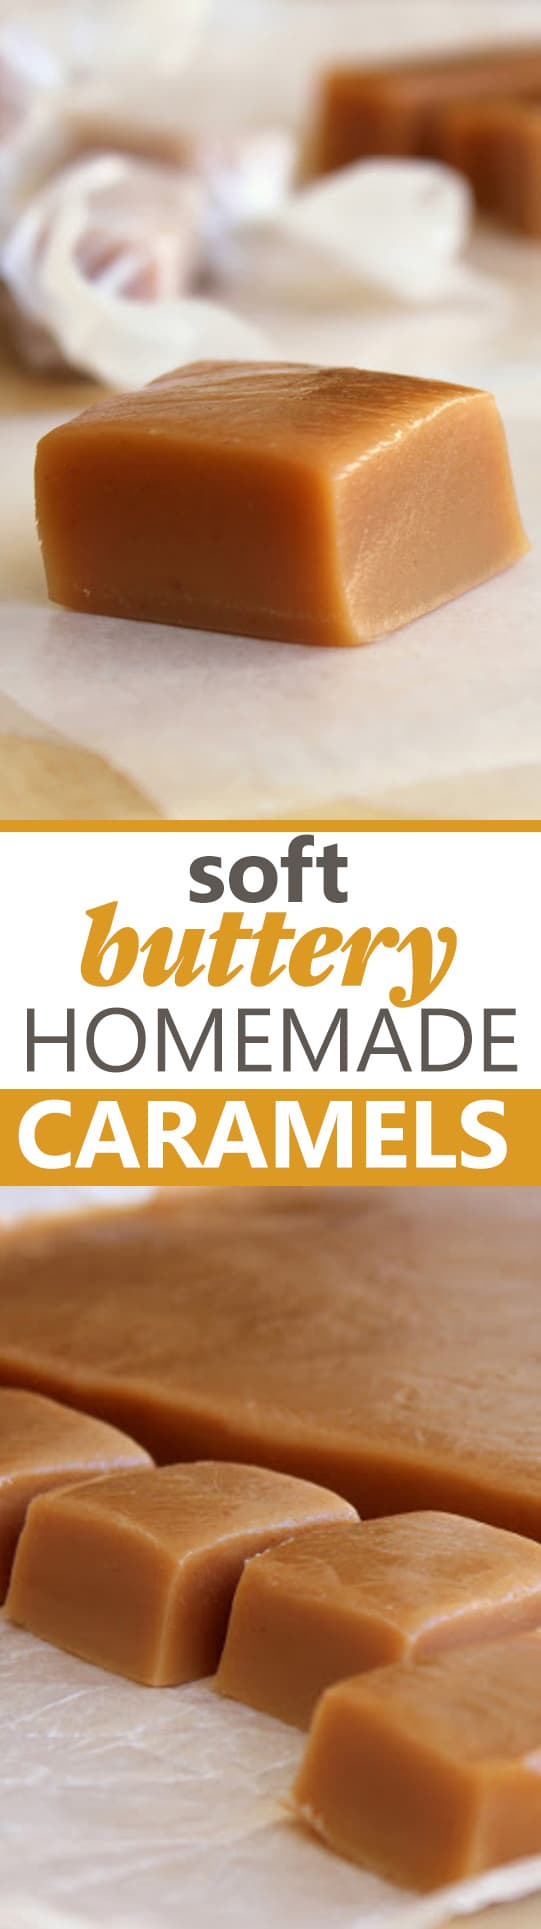 Soft, Buttery Homemade Caramels! A tried and true recipe you'll want to make every Christmas.